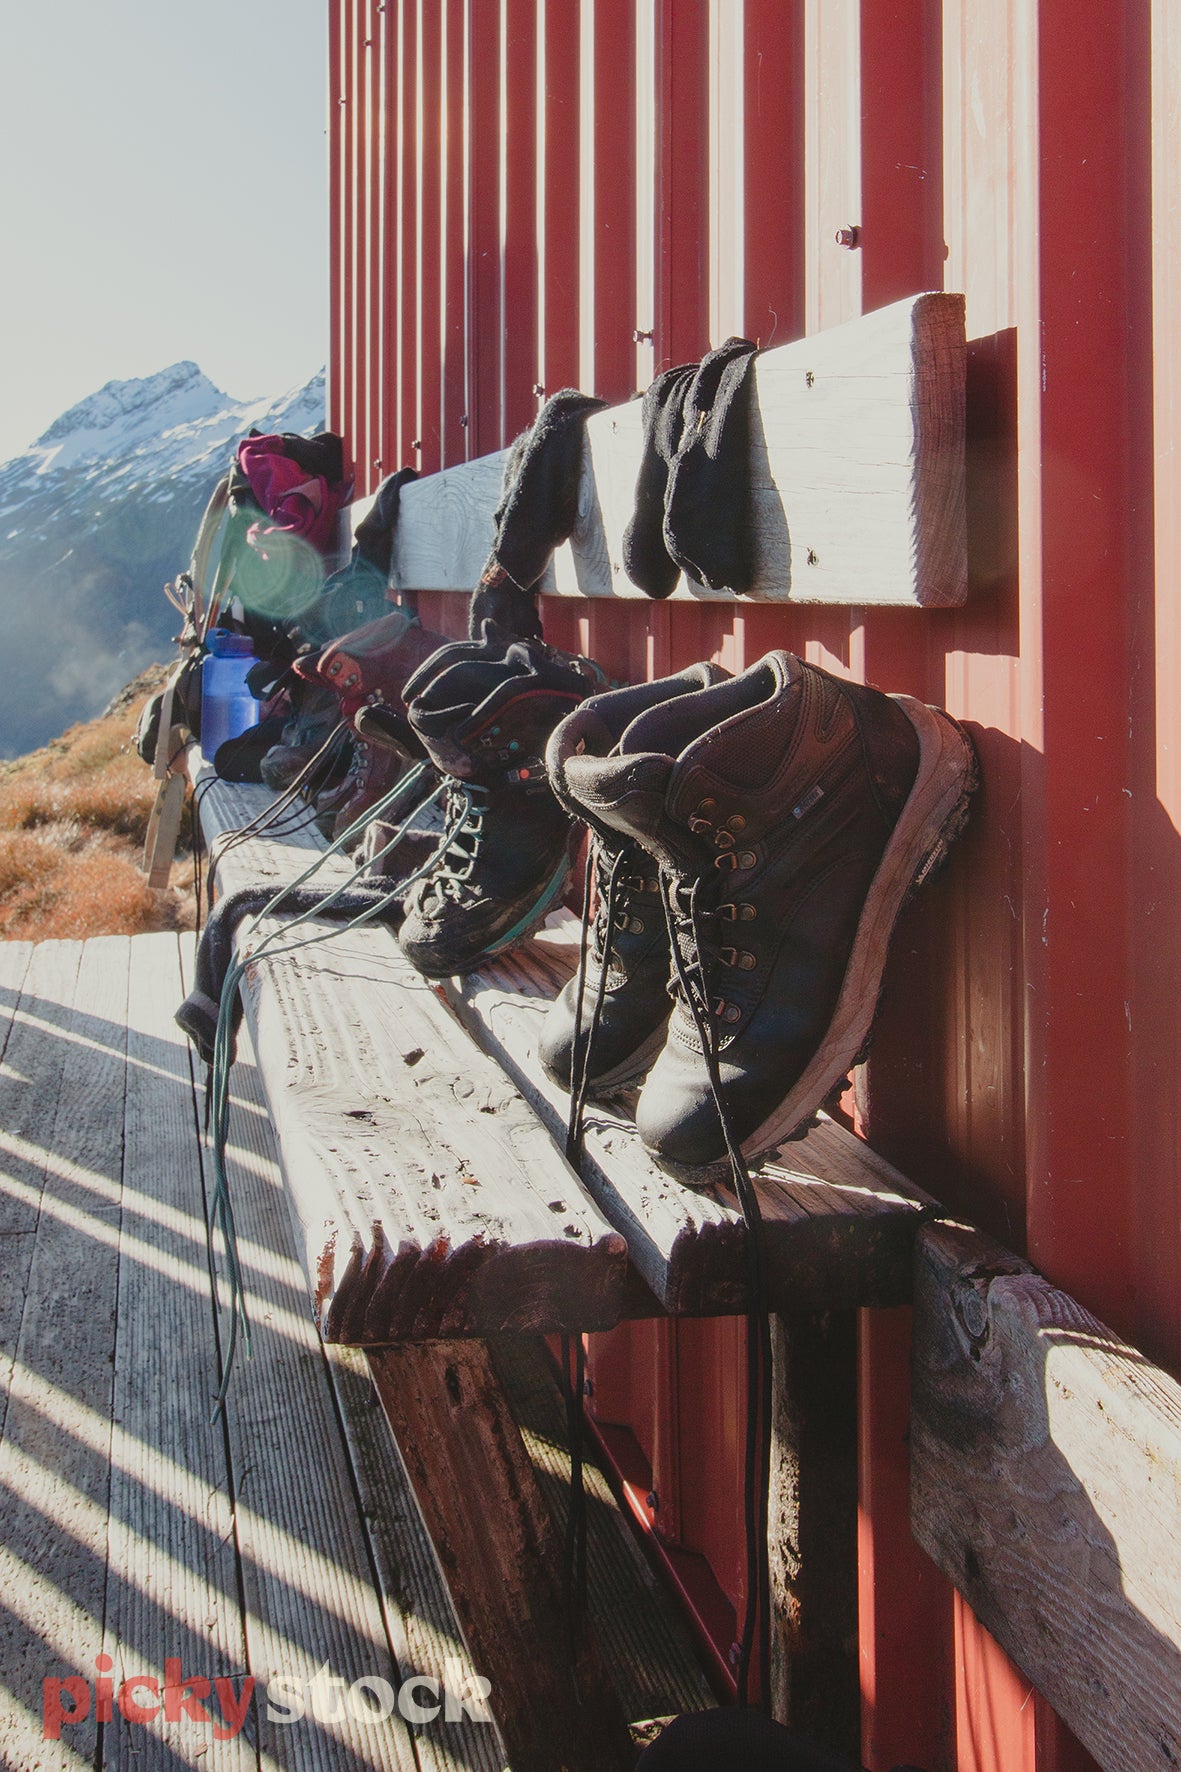 Row of tramping hiking boots outside French Ridge Hut,  Mount Aspiring National Park. Sitting on a outdoor seat, with other tramping gear at the back. Socks also drying out in the sun. Beautiful light hitting the deck creating a shadow across the image. Hut is red.